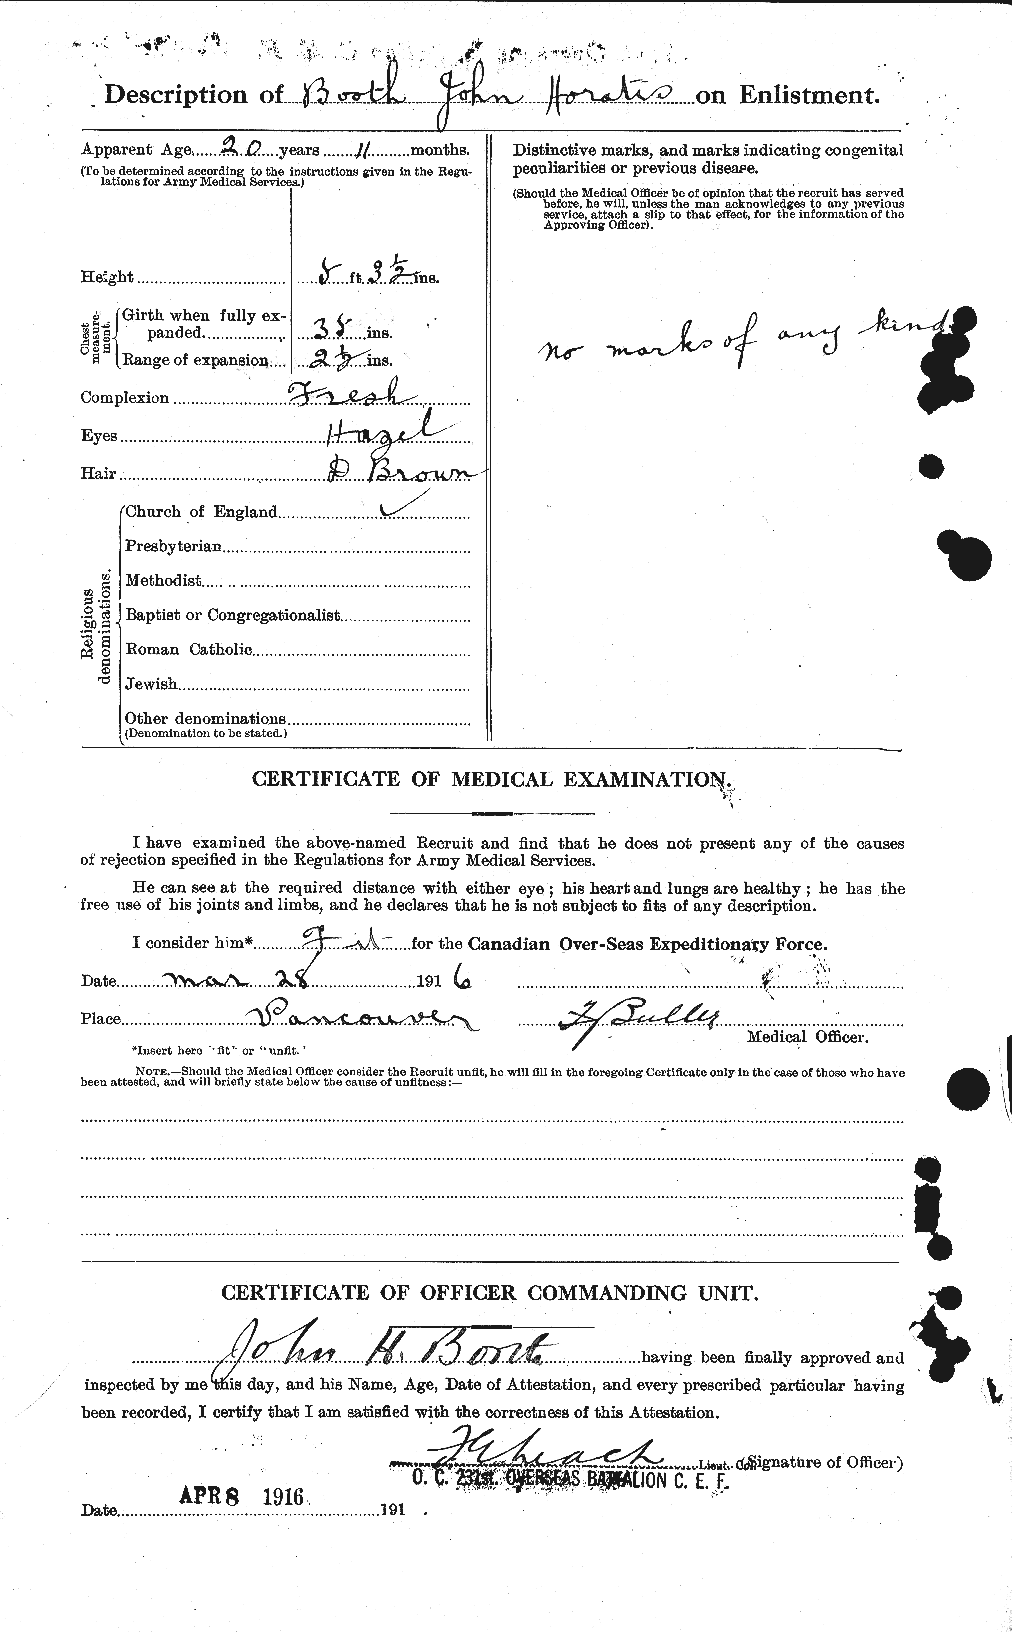 Personnel Records of the First World War - CEF 250929b